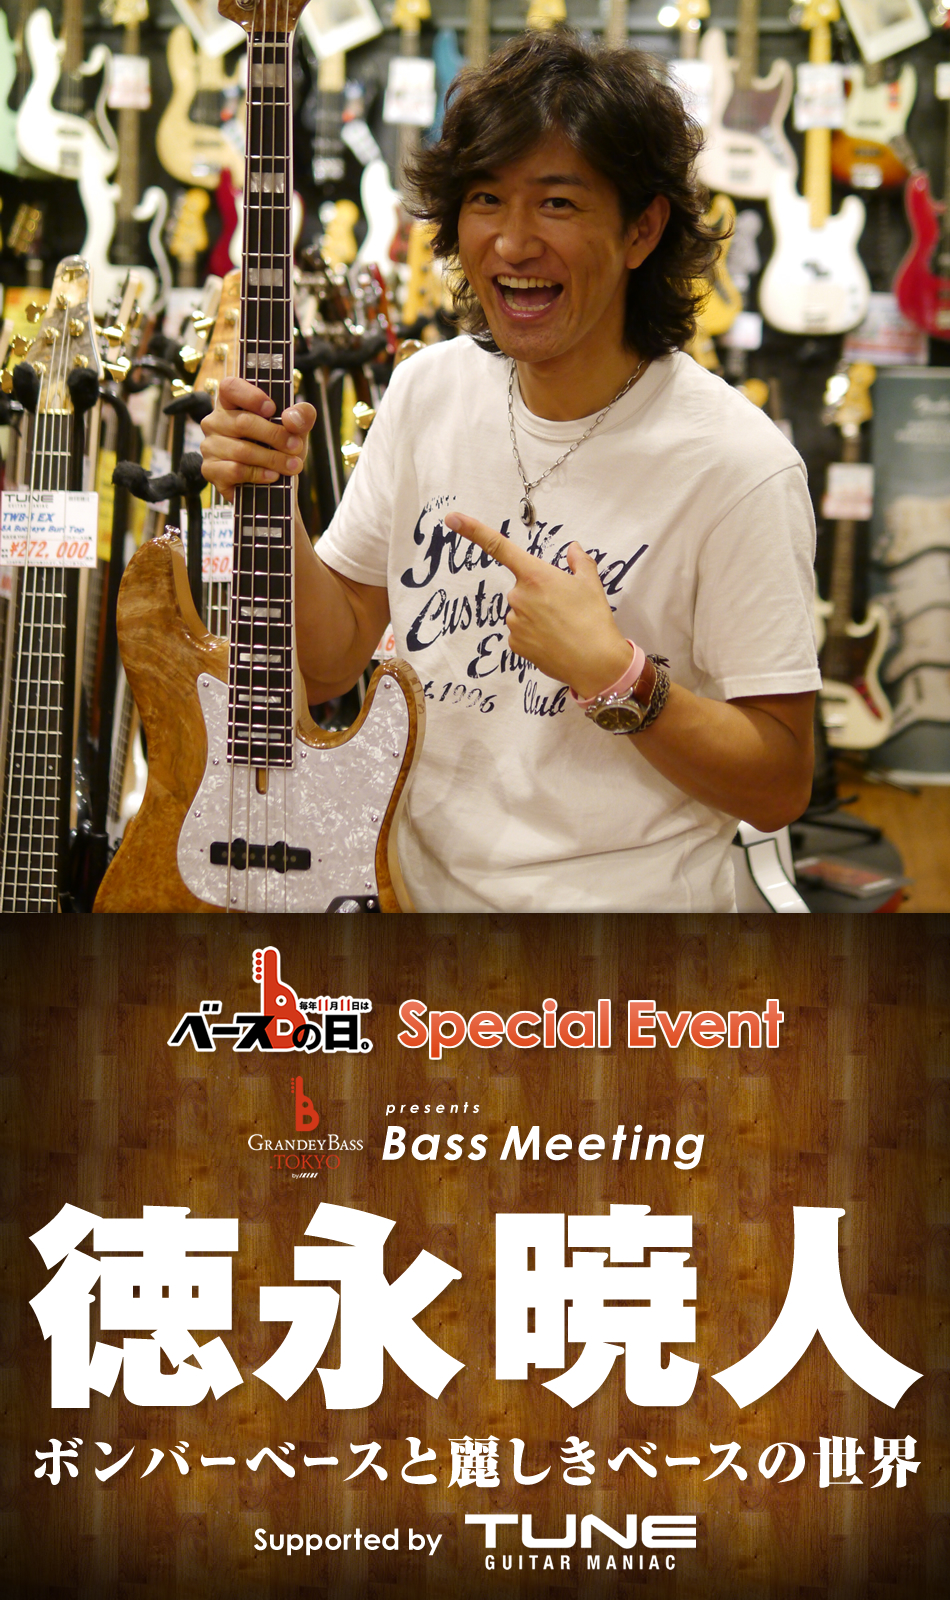 GRANDEY BASS TOKYO Presents Bass Meeting 『徳永 暁人 ボンバーベースと麗しきベースの世界』 Supported by TUNE